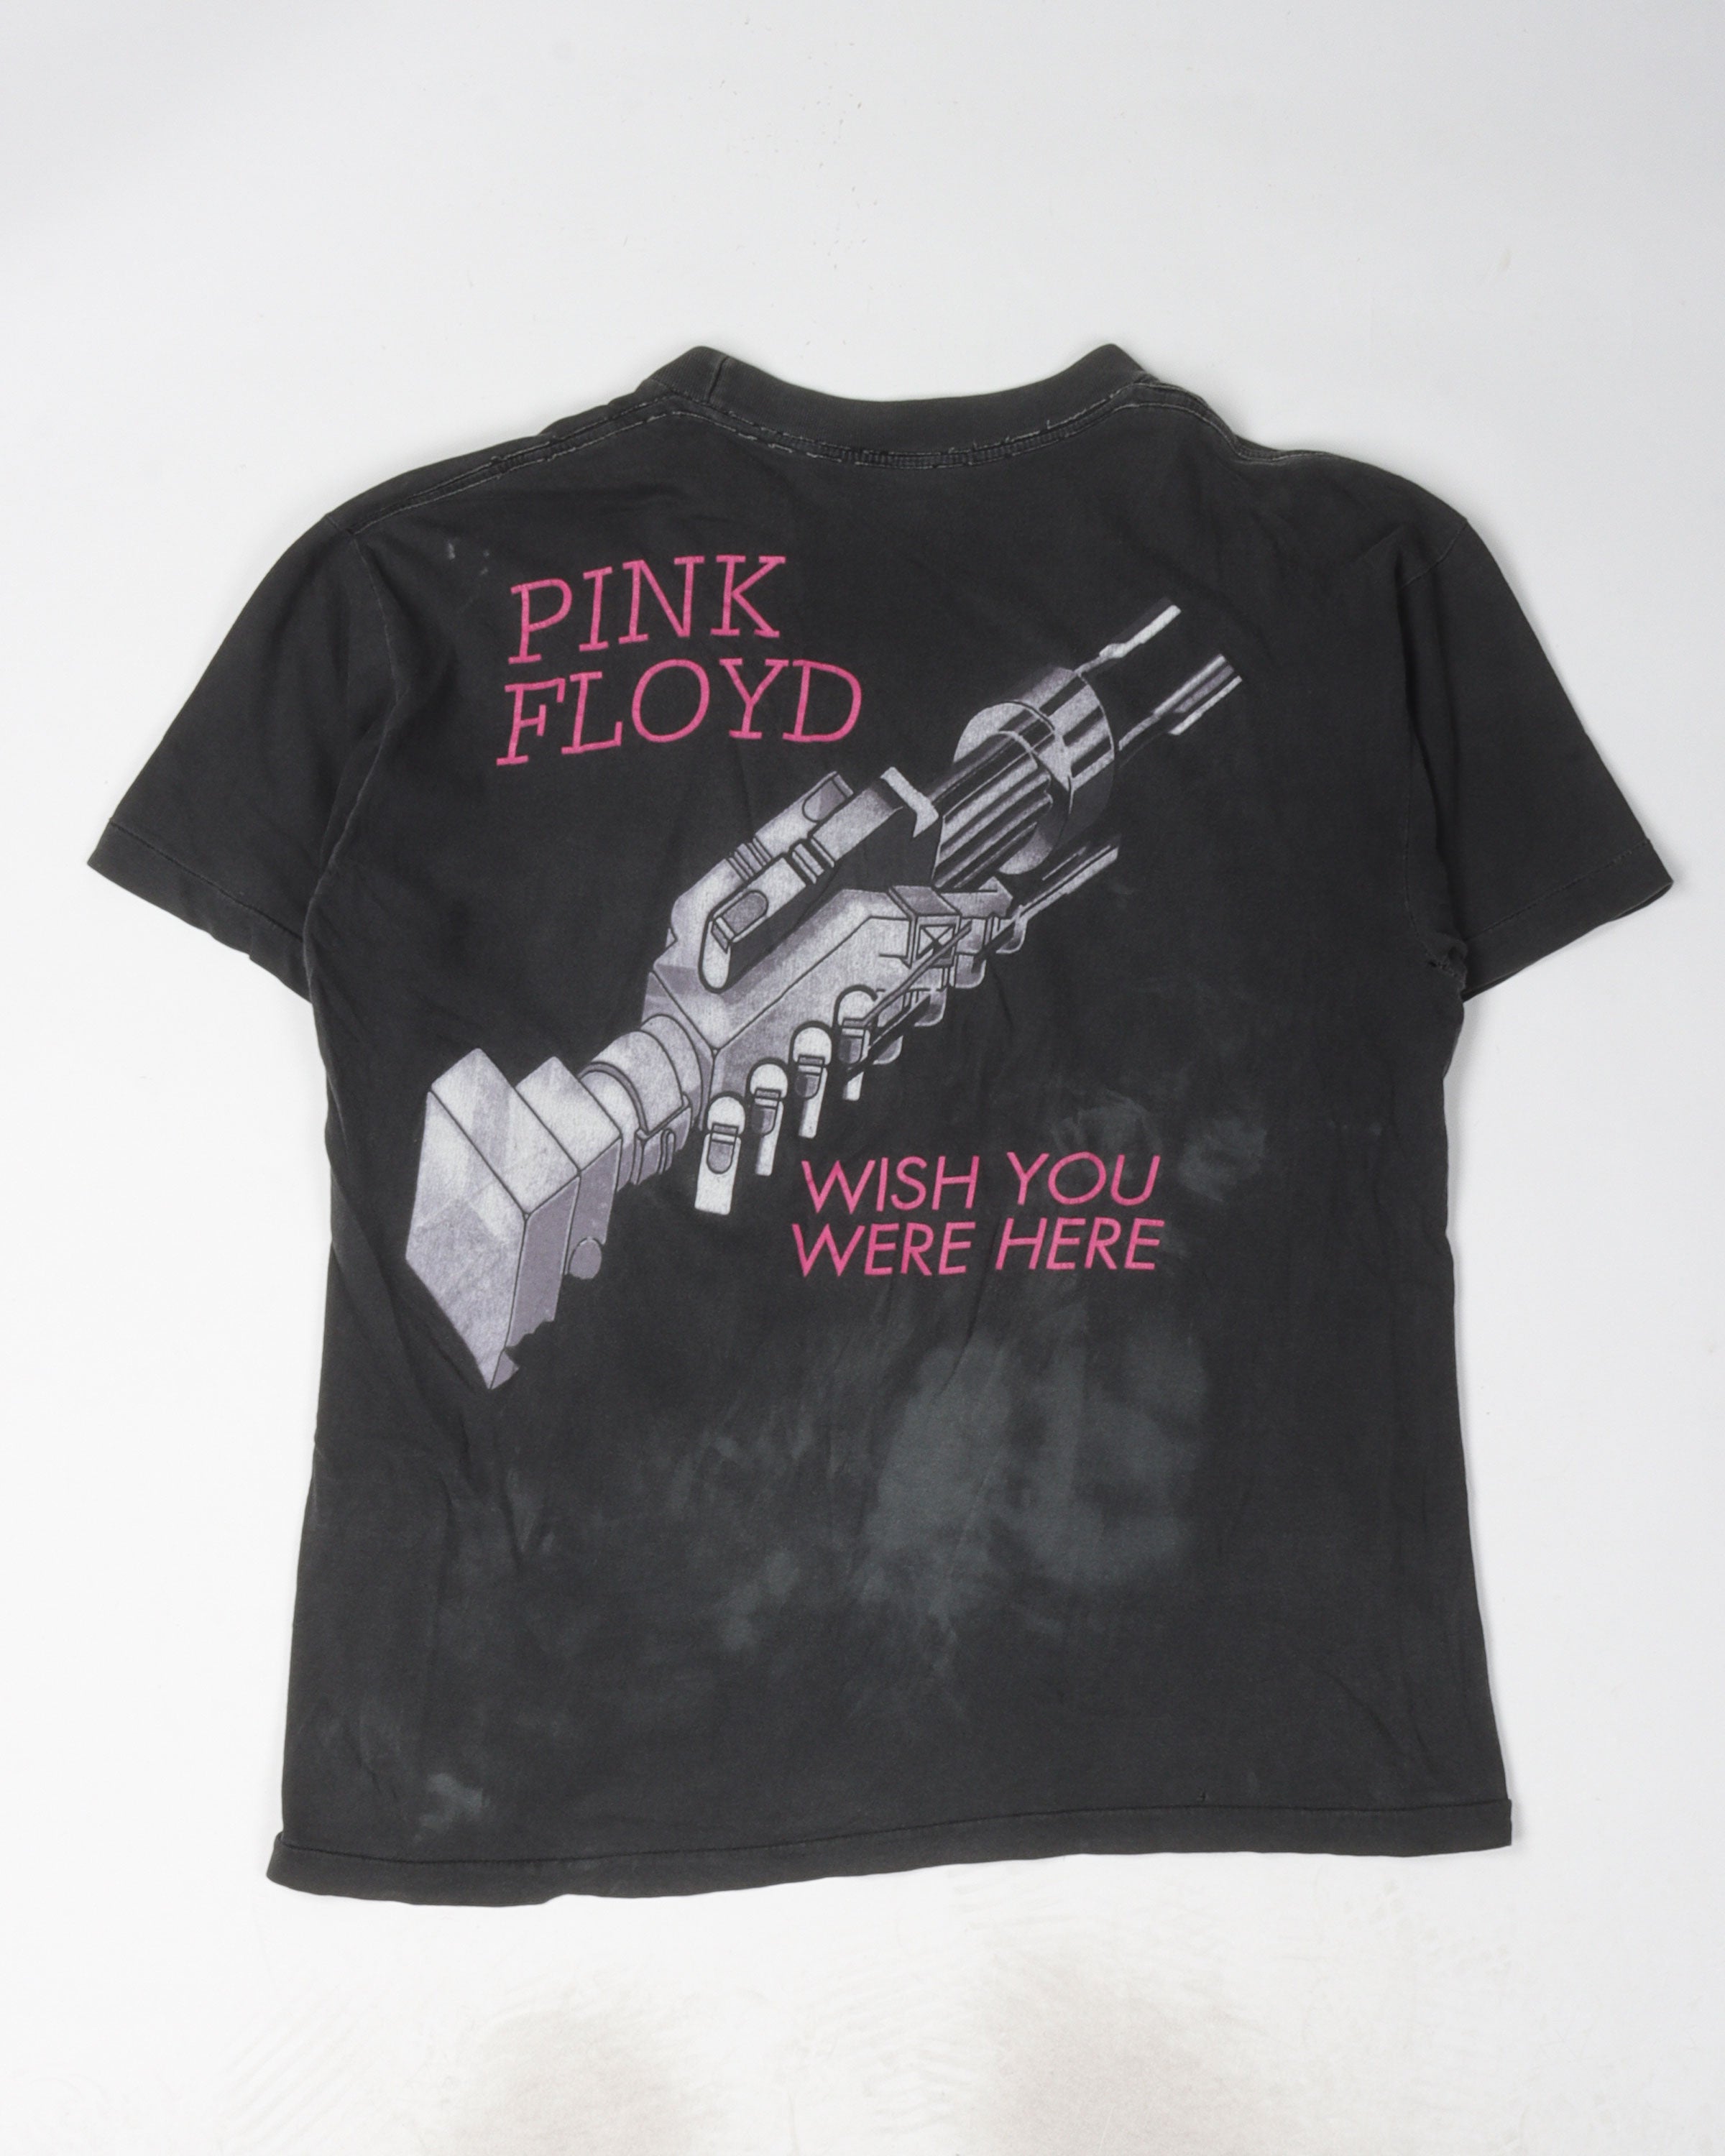 Pink Floyd "Wish You Were Here" T-Shirt